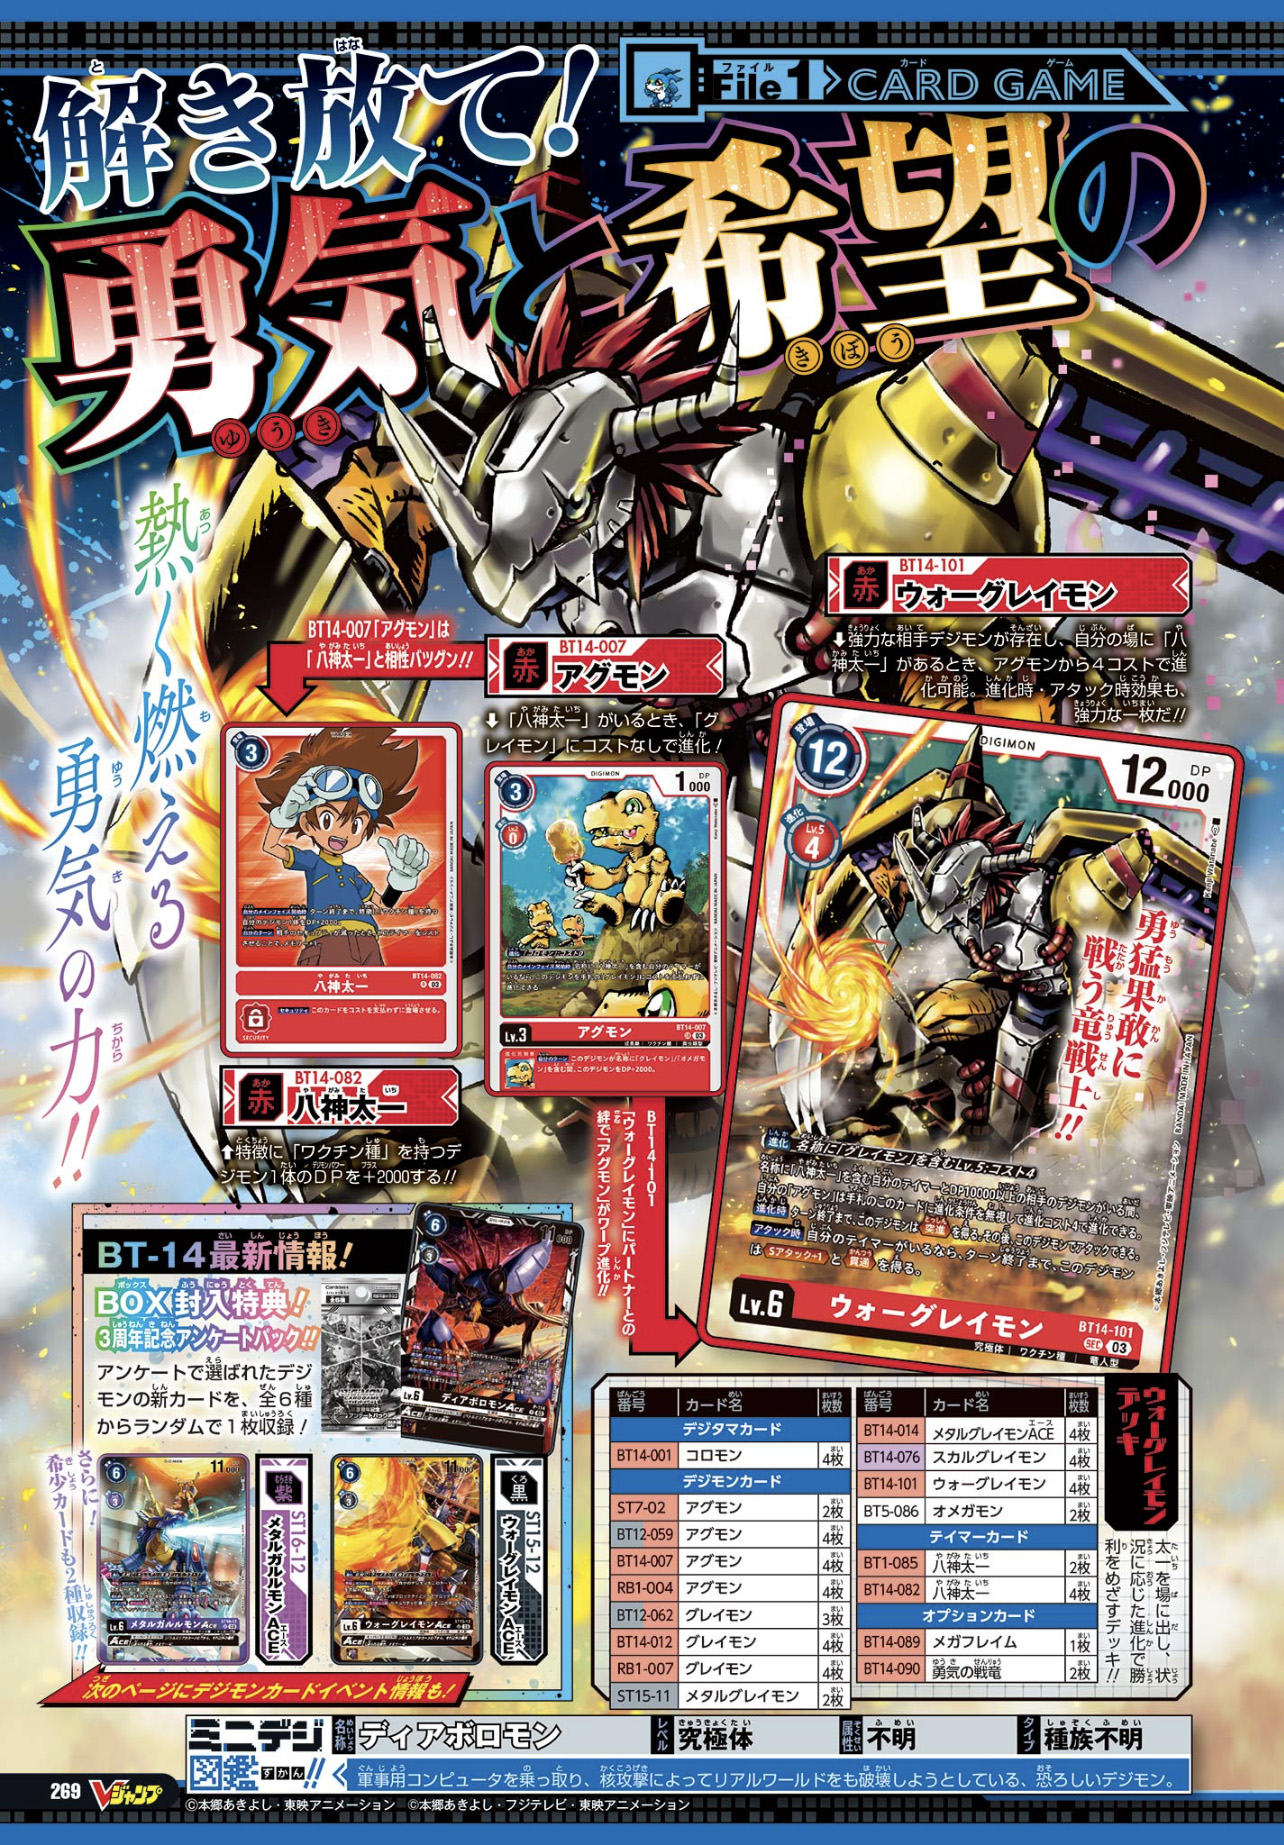 Digimon Anime Start Guide- Ghost Game Introduction Preview Magazine